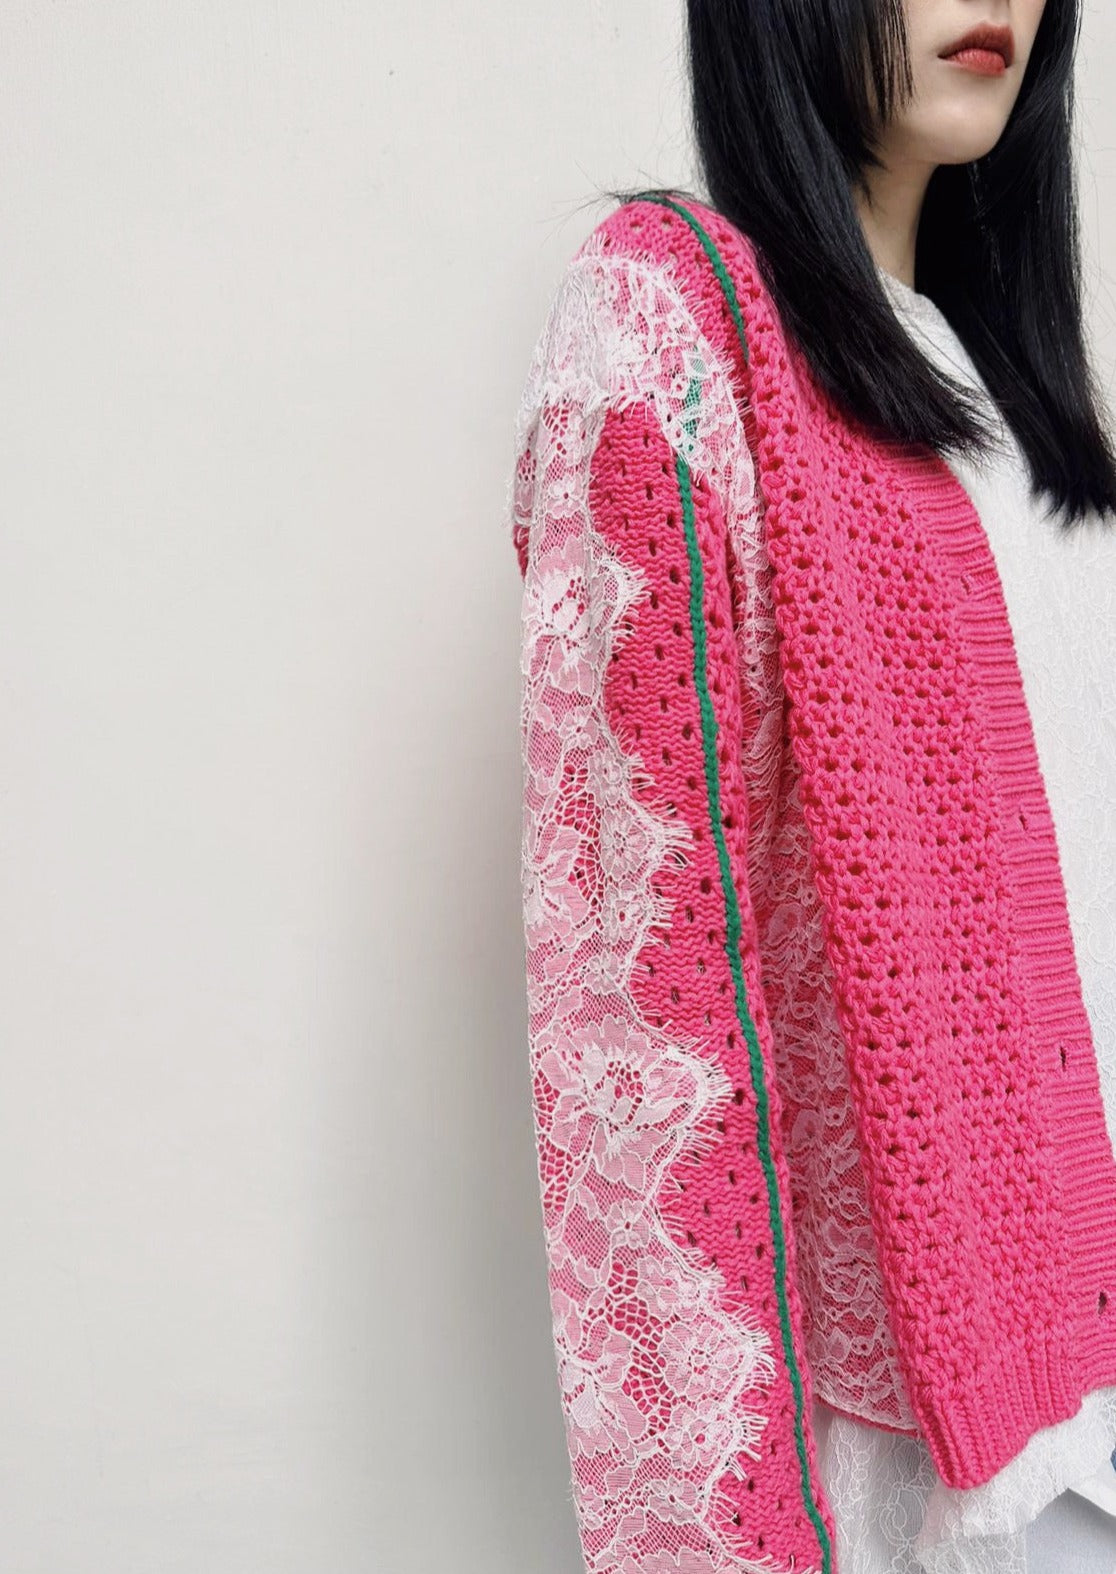 aalis MICKE crochet lace trim sleeves cardigan (Pink mix)